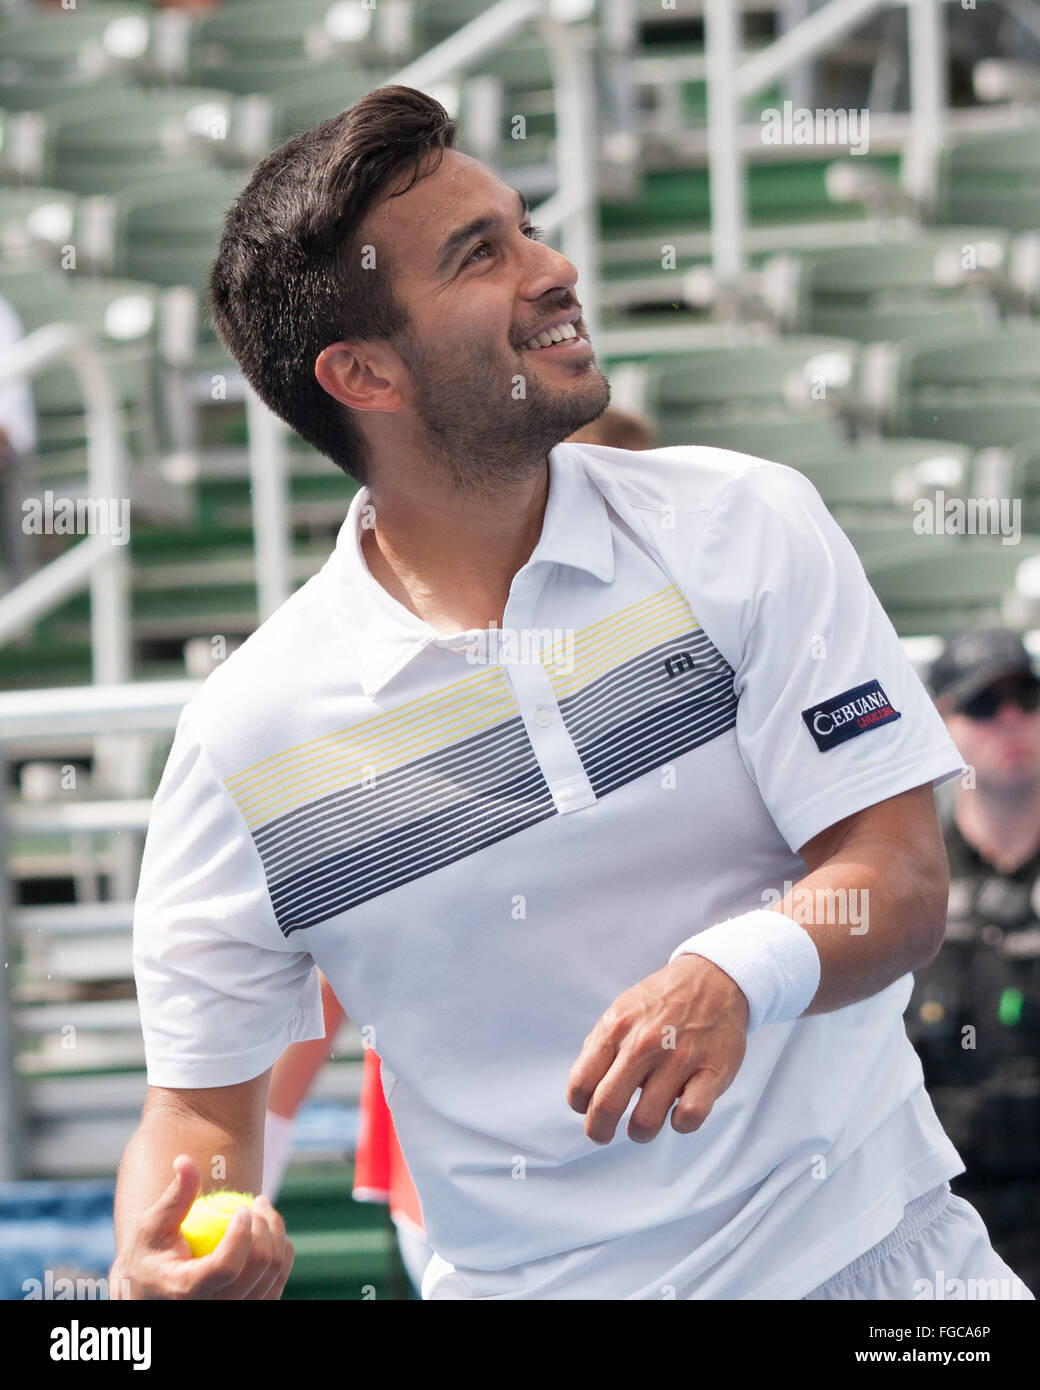 Delray Beach, Florida, US. 18th Feb, 2016. TREAT HUEY, Filipino-American pro tennis player, prepares to throw a tennis ball to the fans after the Filipino-Belarusian third seed duo TREAT HUEY and MAX MIRNYI won through to the ATP World Tour Delray Beach Open semi-finals after a 6-3, 6-4 triumph over Australians Chris Guccione and Bernard Tomic. Credit:  Arnold Drapkin/ZUMA Wire/Alamy Live News Stock Photo